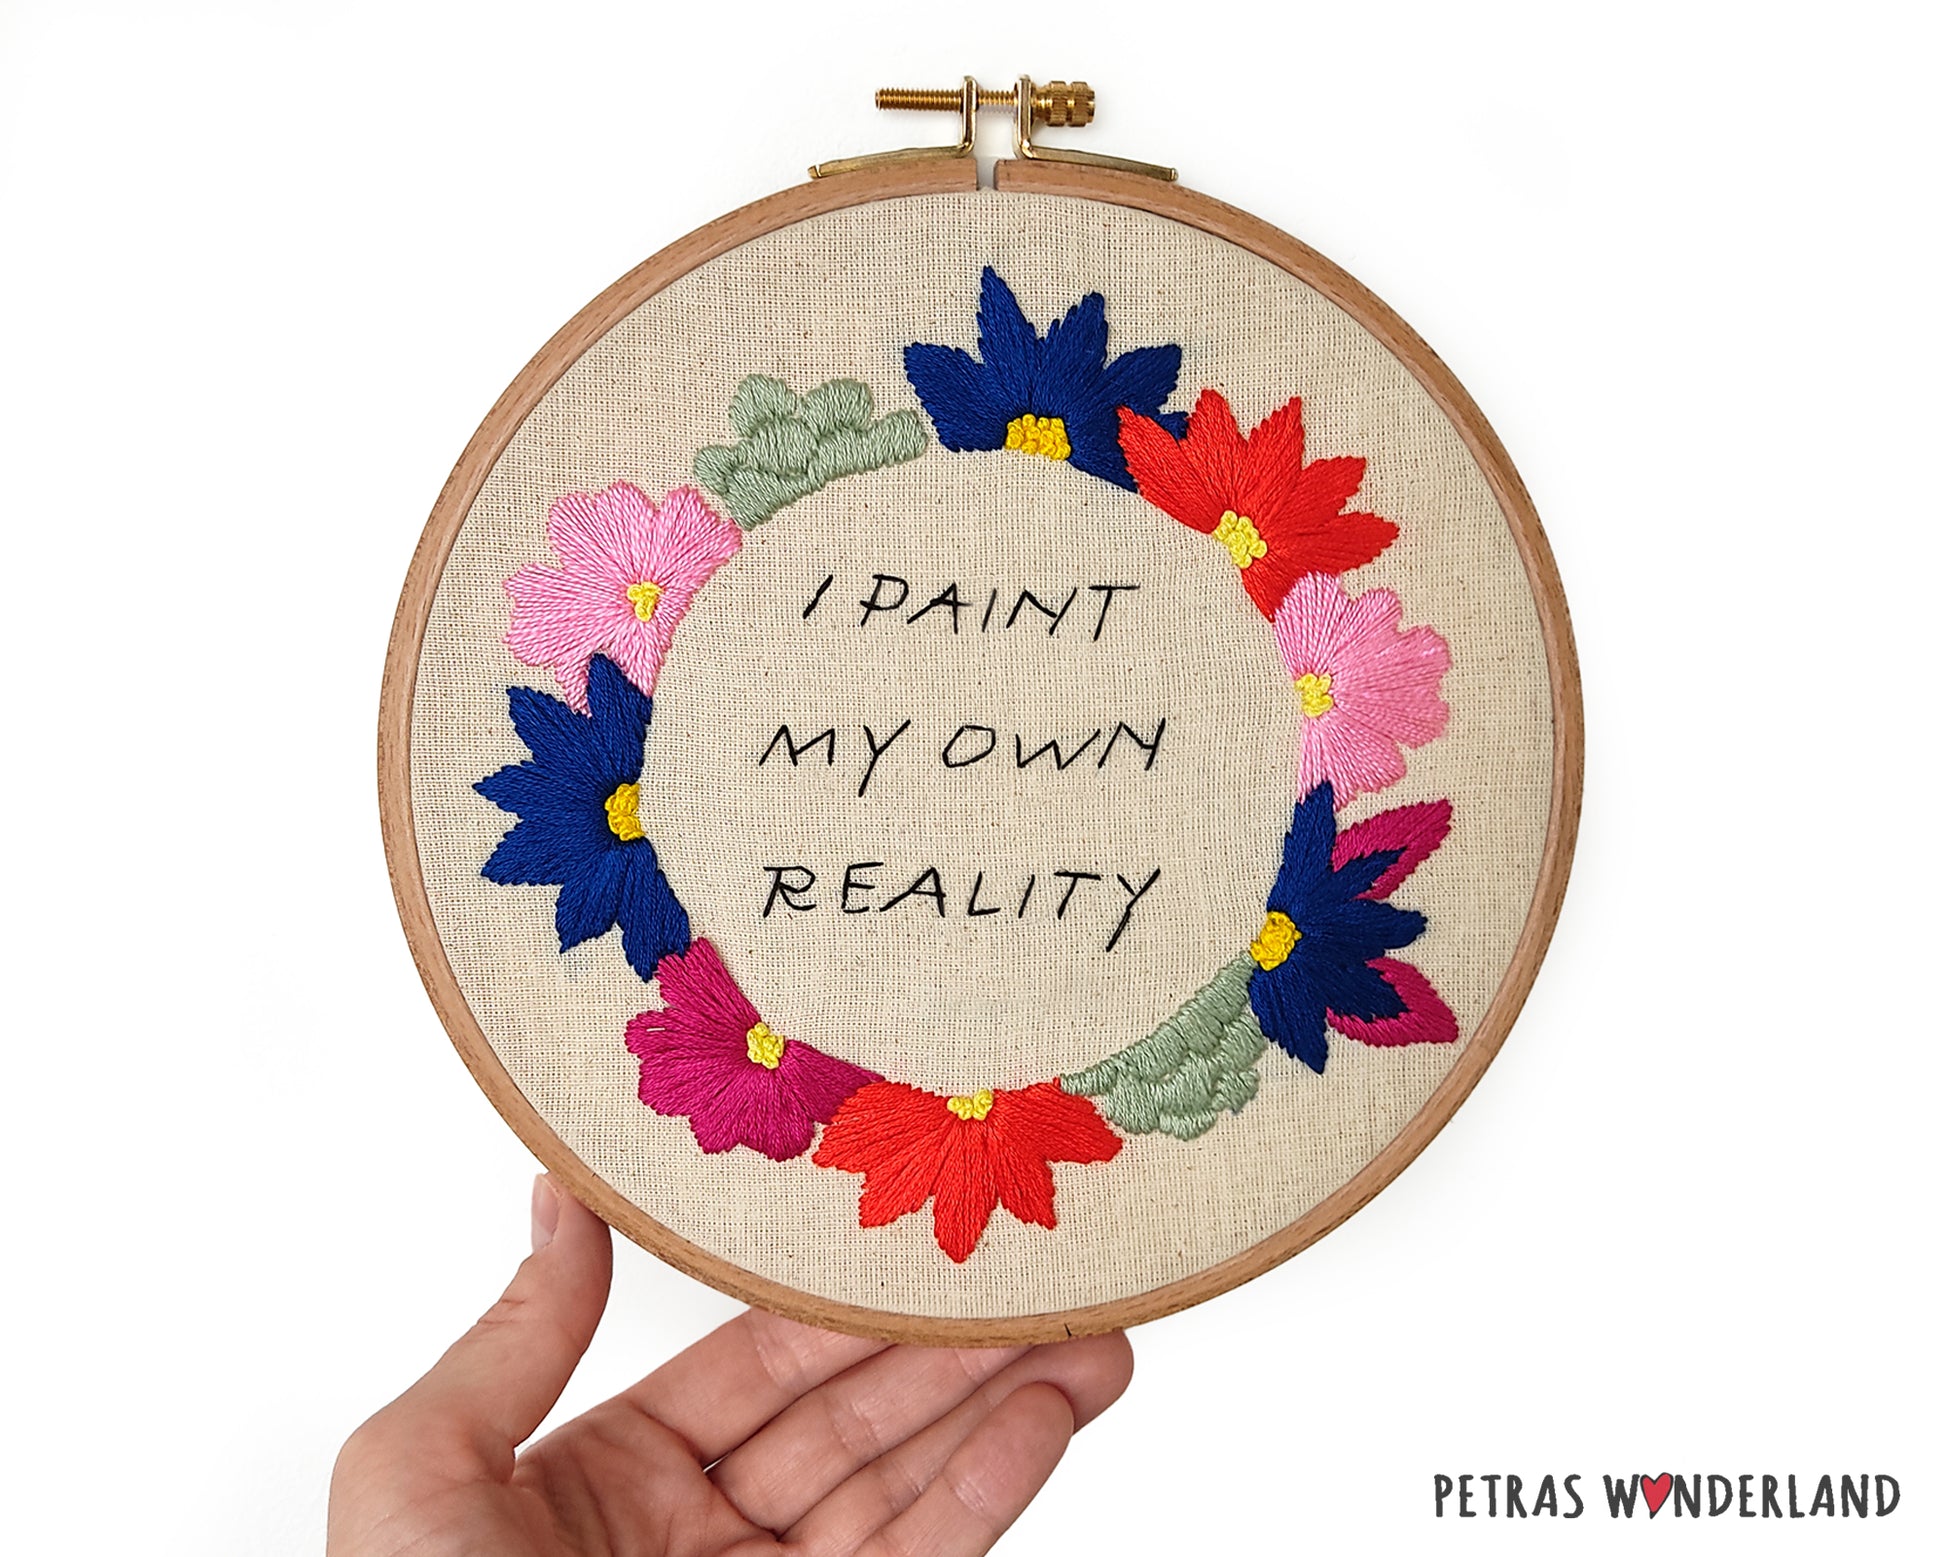 Famous Art Quote - PDF embroidery pattern and tutorial 01